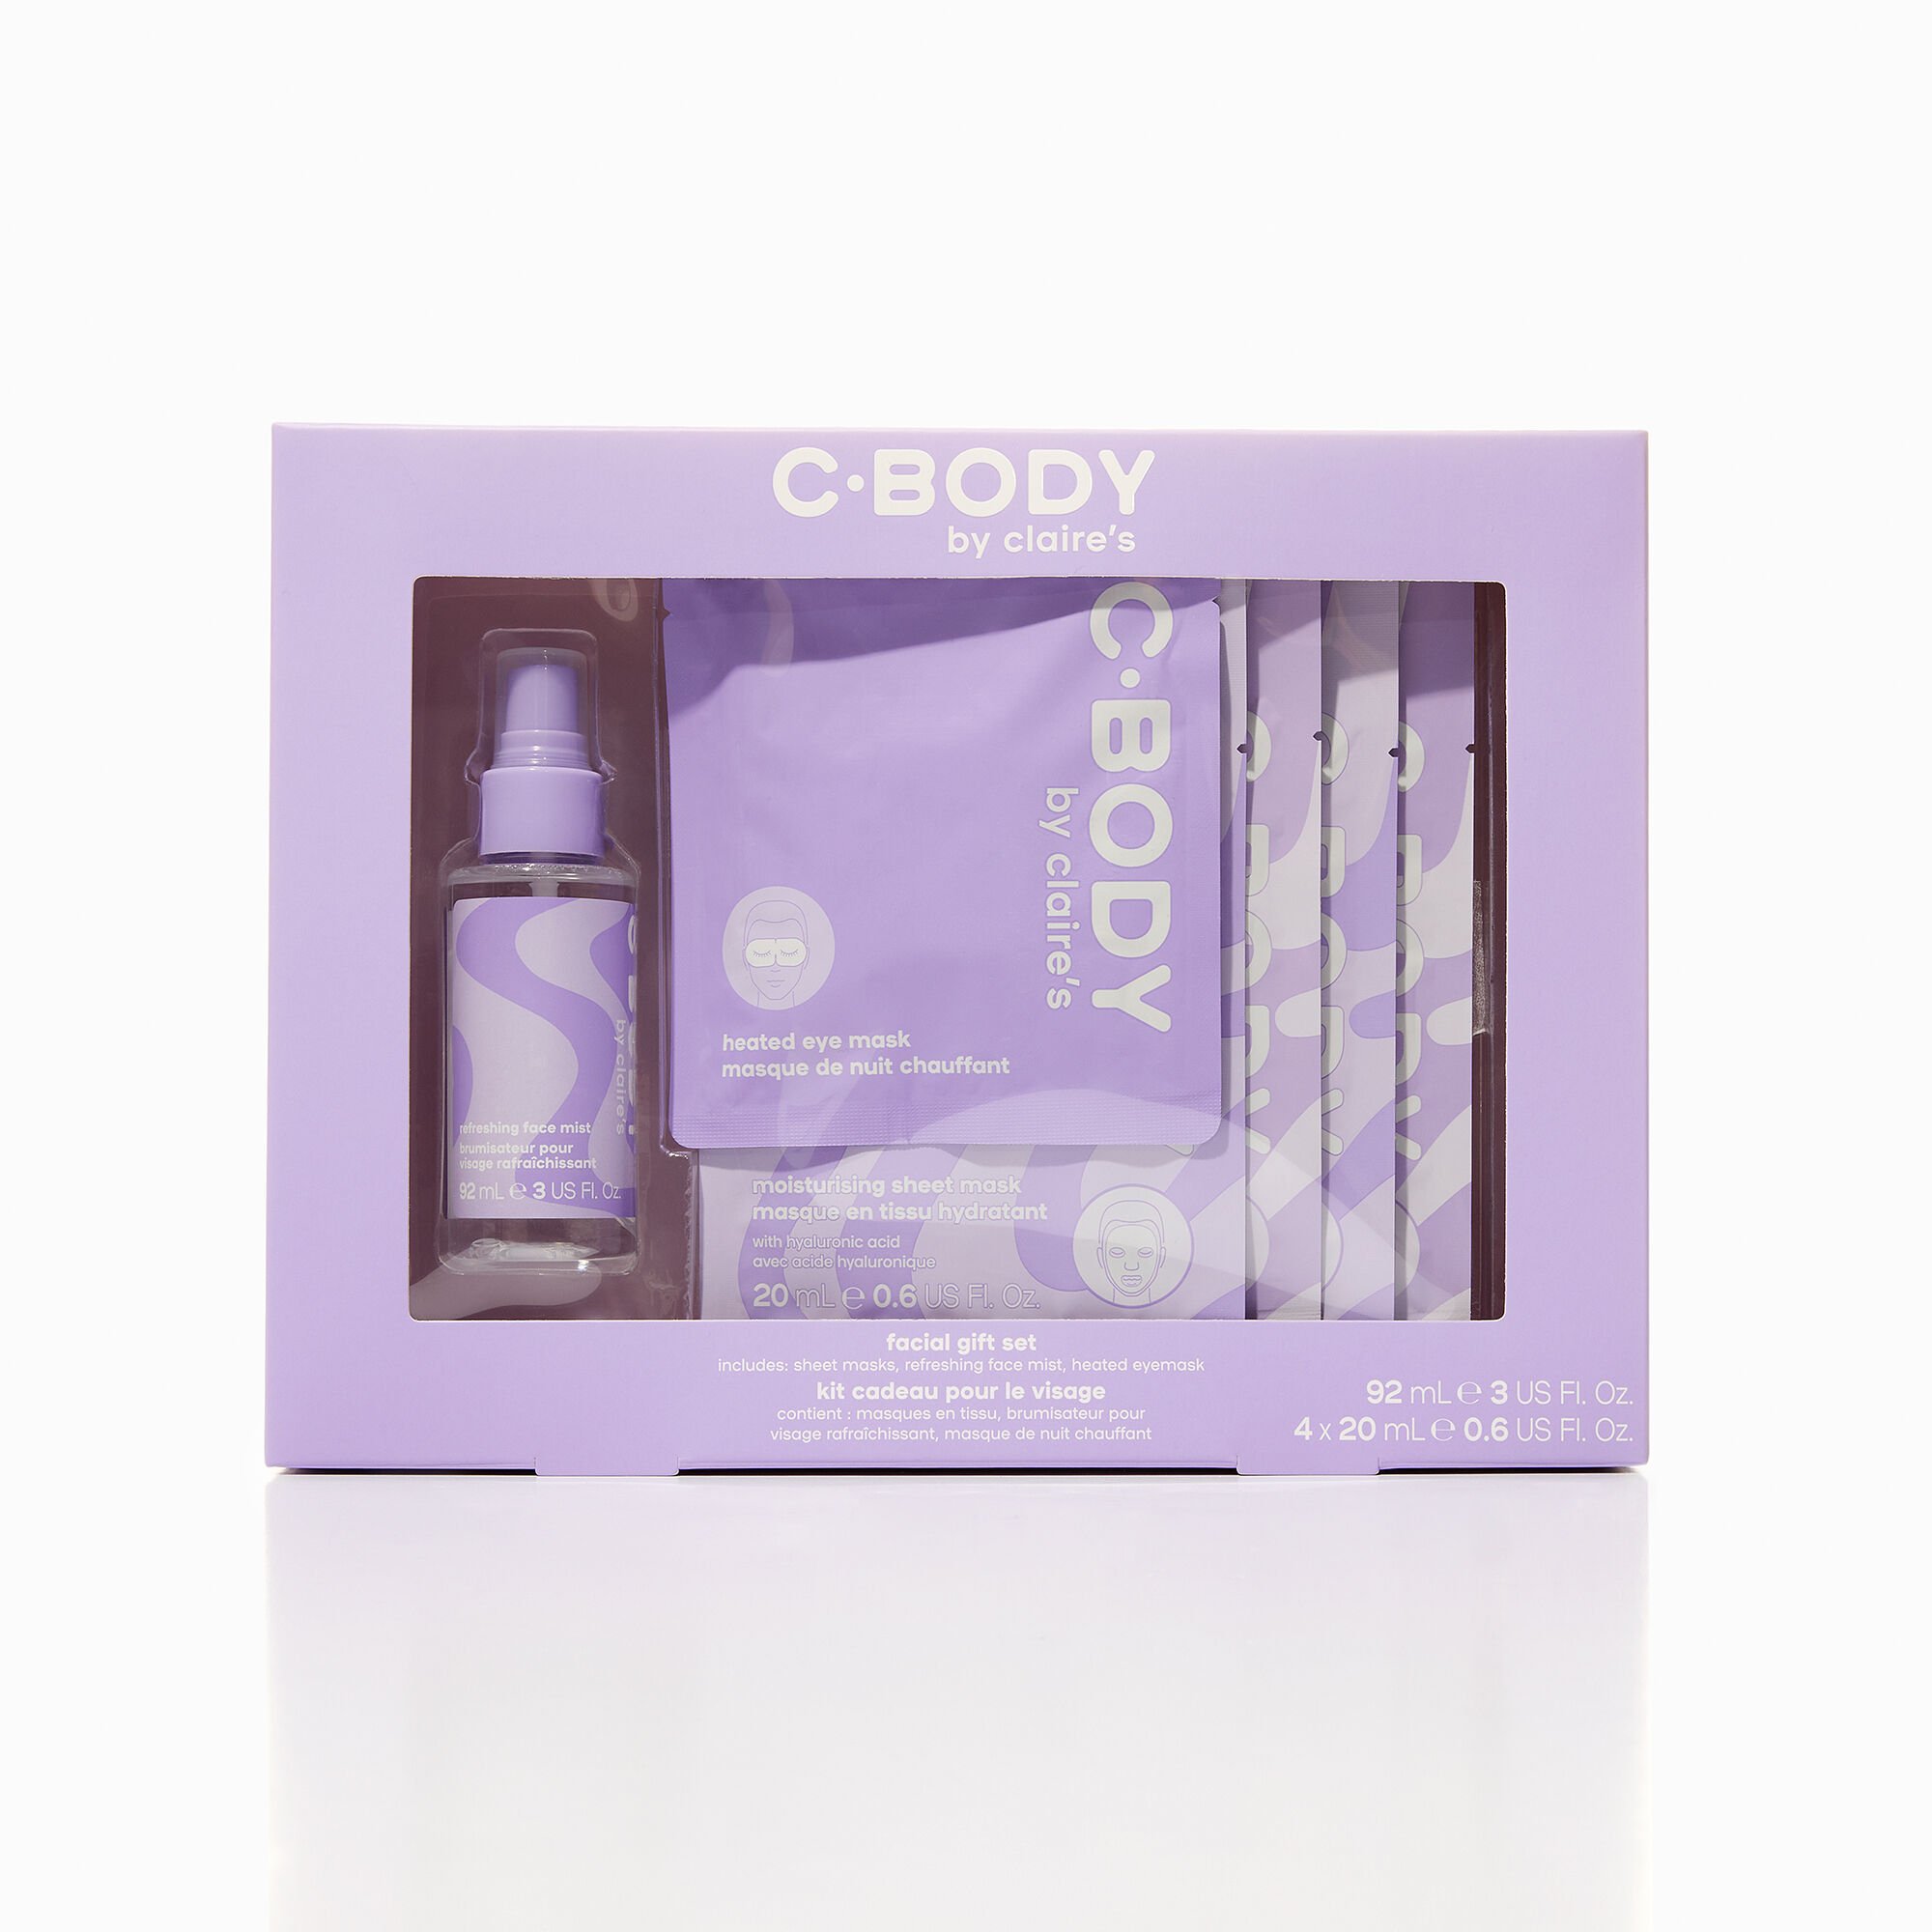 View Cbody By Claires Vegan Facial Gift Set 6 Pack information